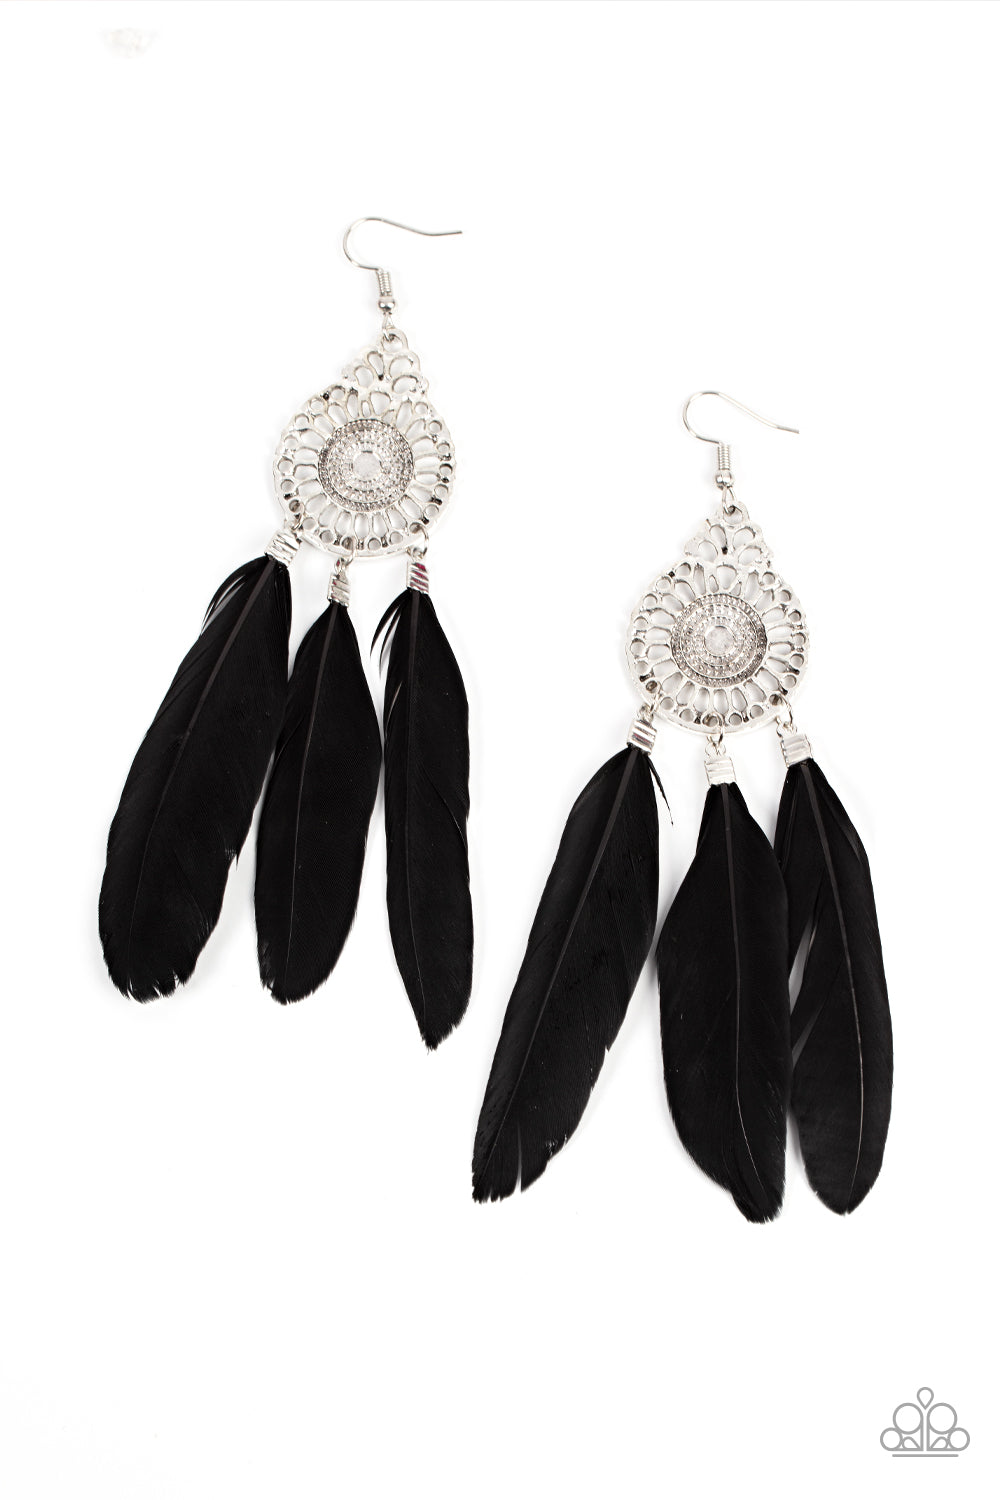 Pretty in PLUMES - Black Feather Earrings - Princess Glam Shop